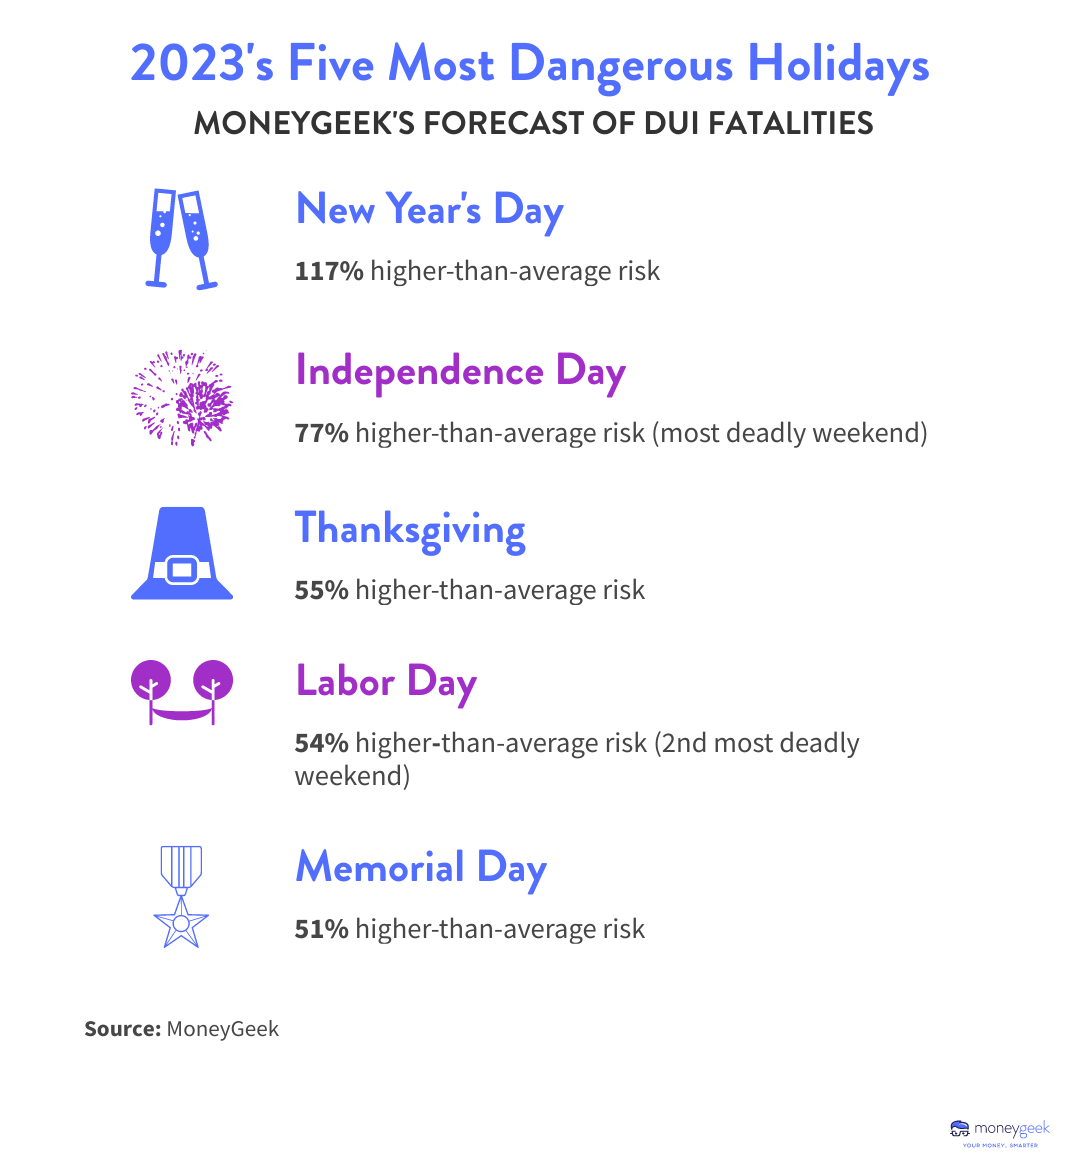 List showing that New Year’s Day is the most dangerous day for DUIs, followed by July 4 and Thanksgiving.